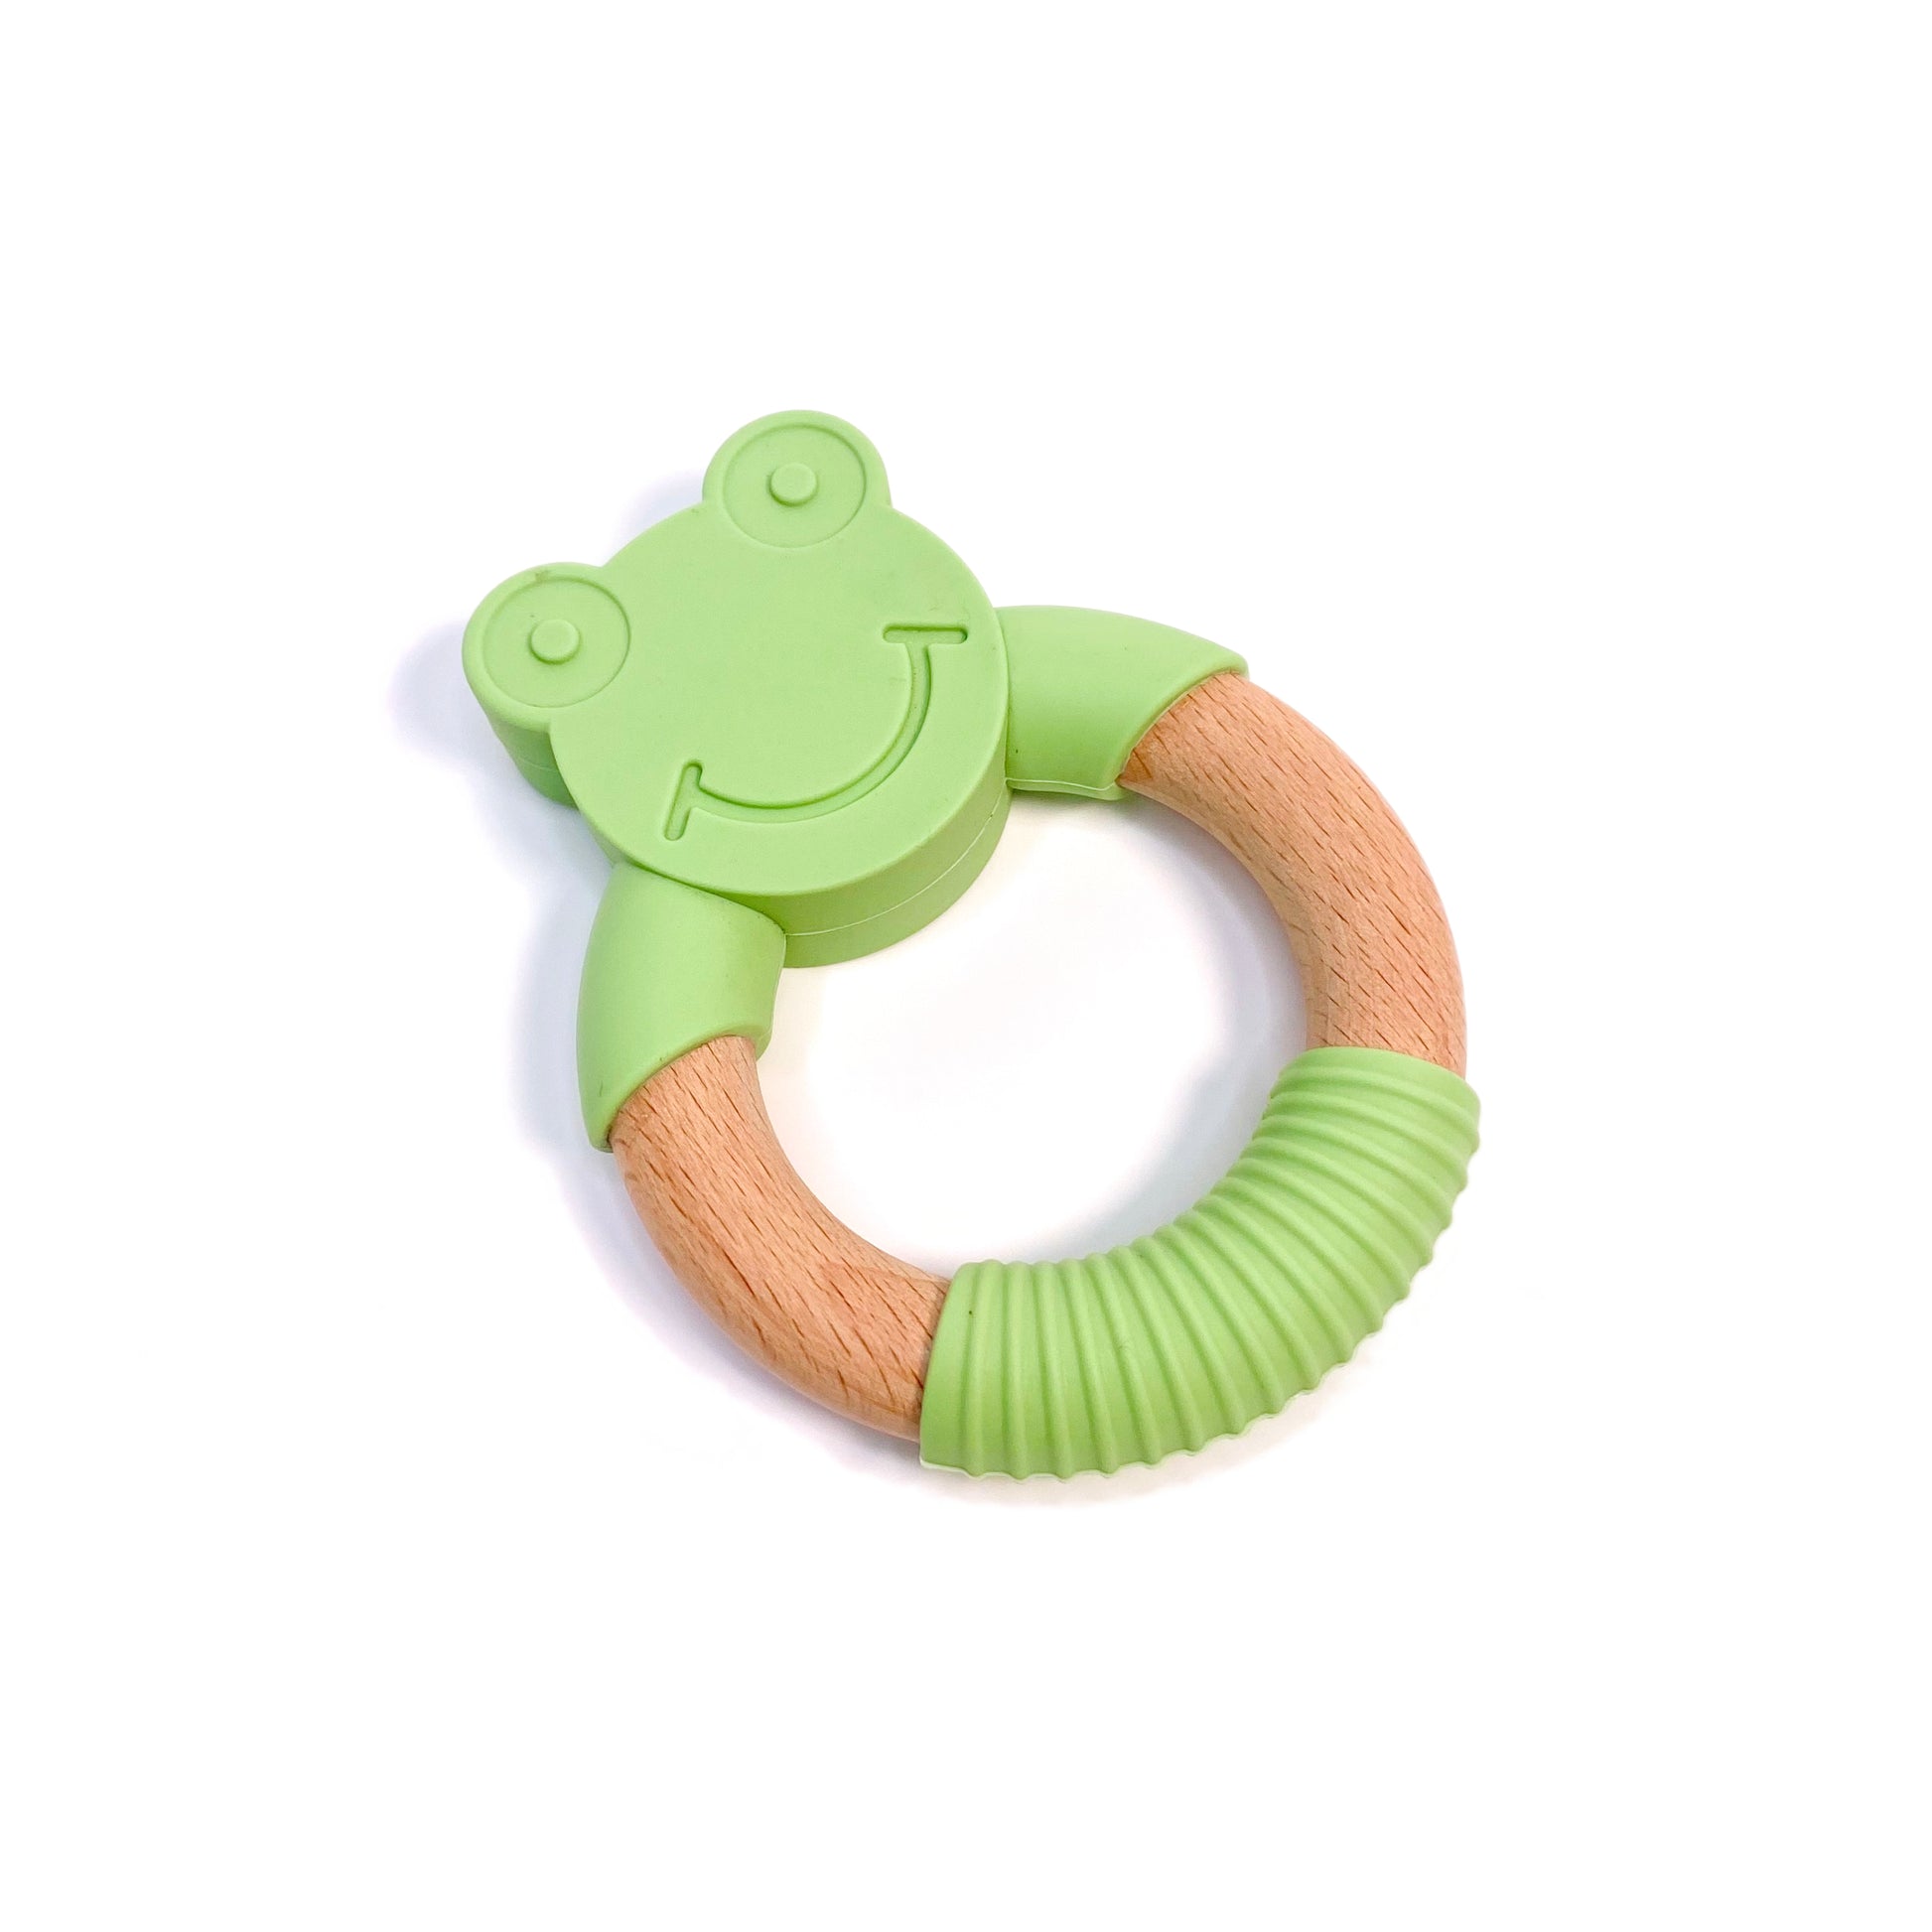 A teething ring made of silicone and bamboo, with a green frog design.